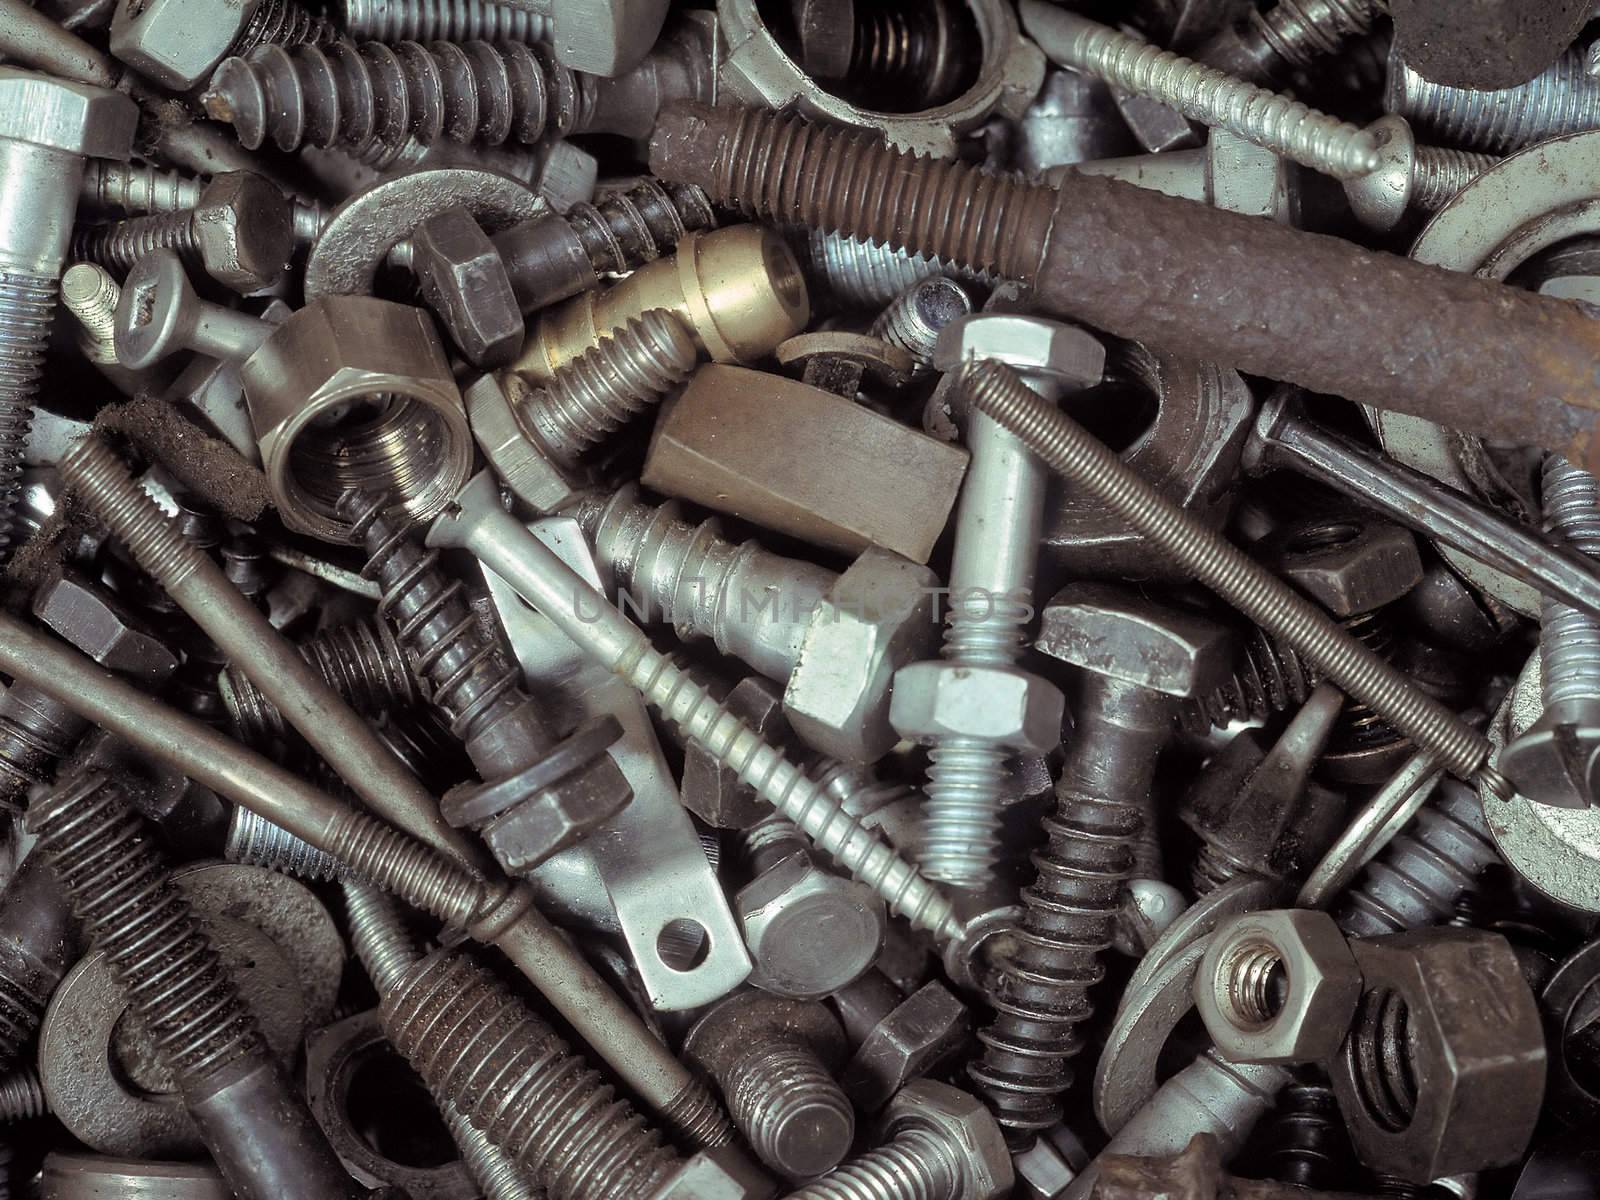 An assortment of bolts, screws, nuts, washers and all kinds of other fasteners piled in a toolbox.
